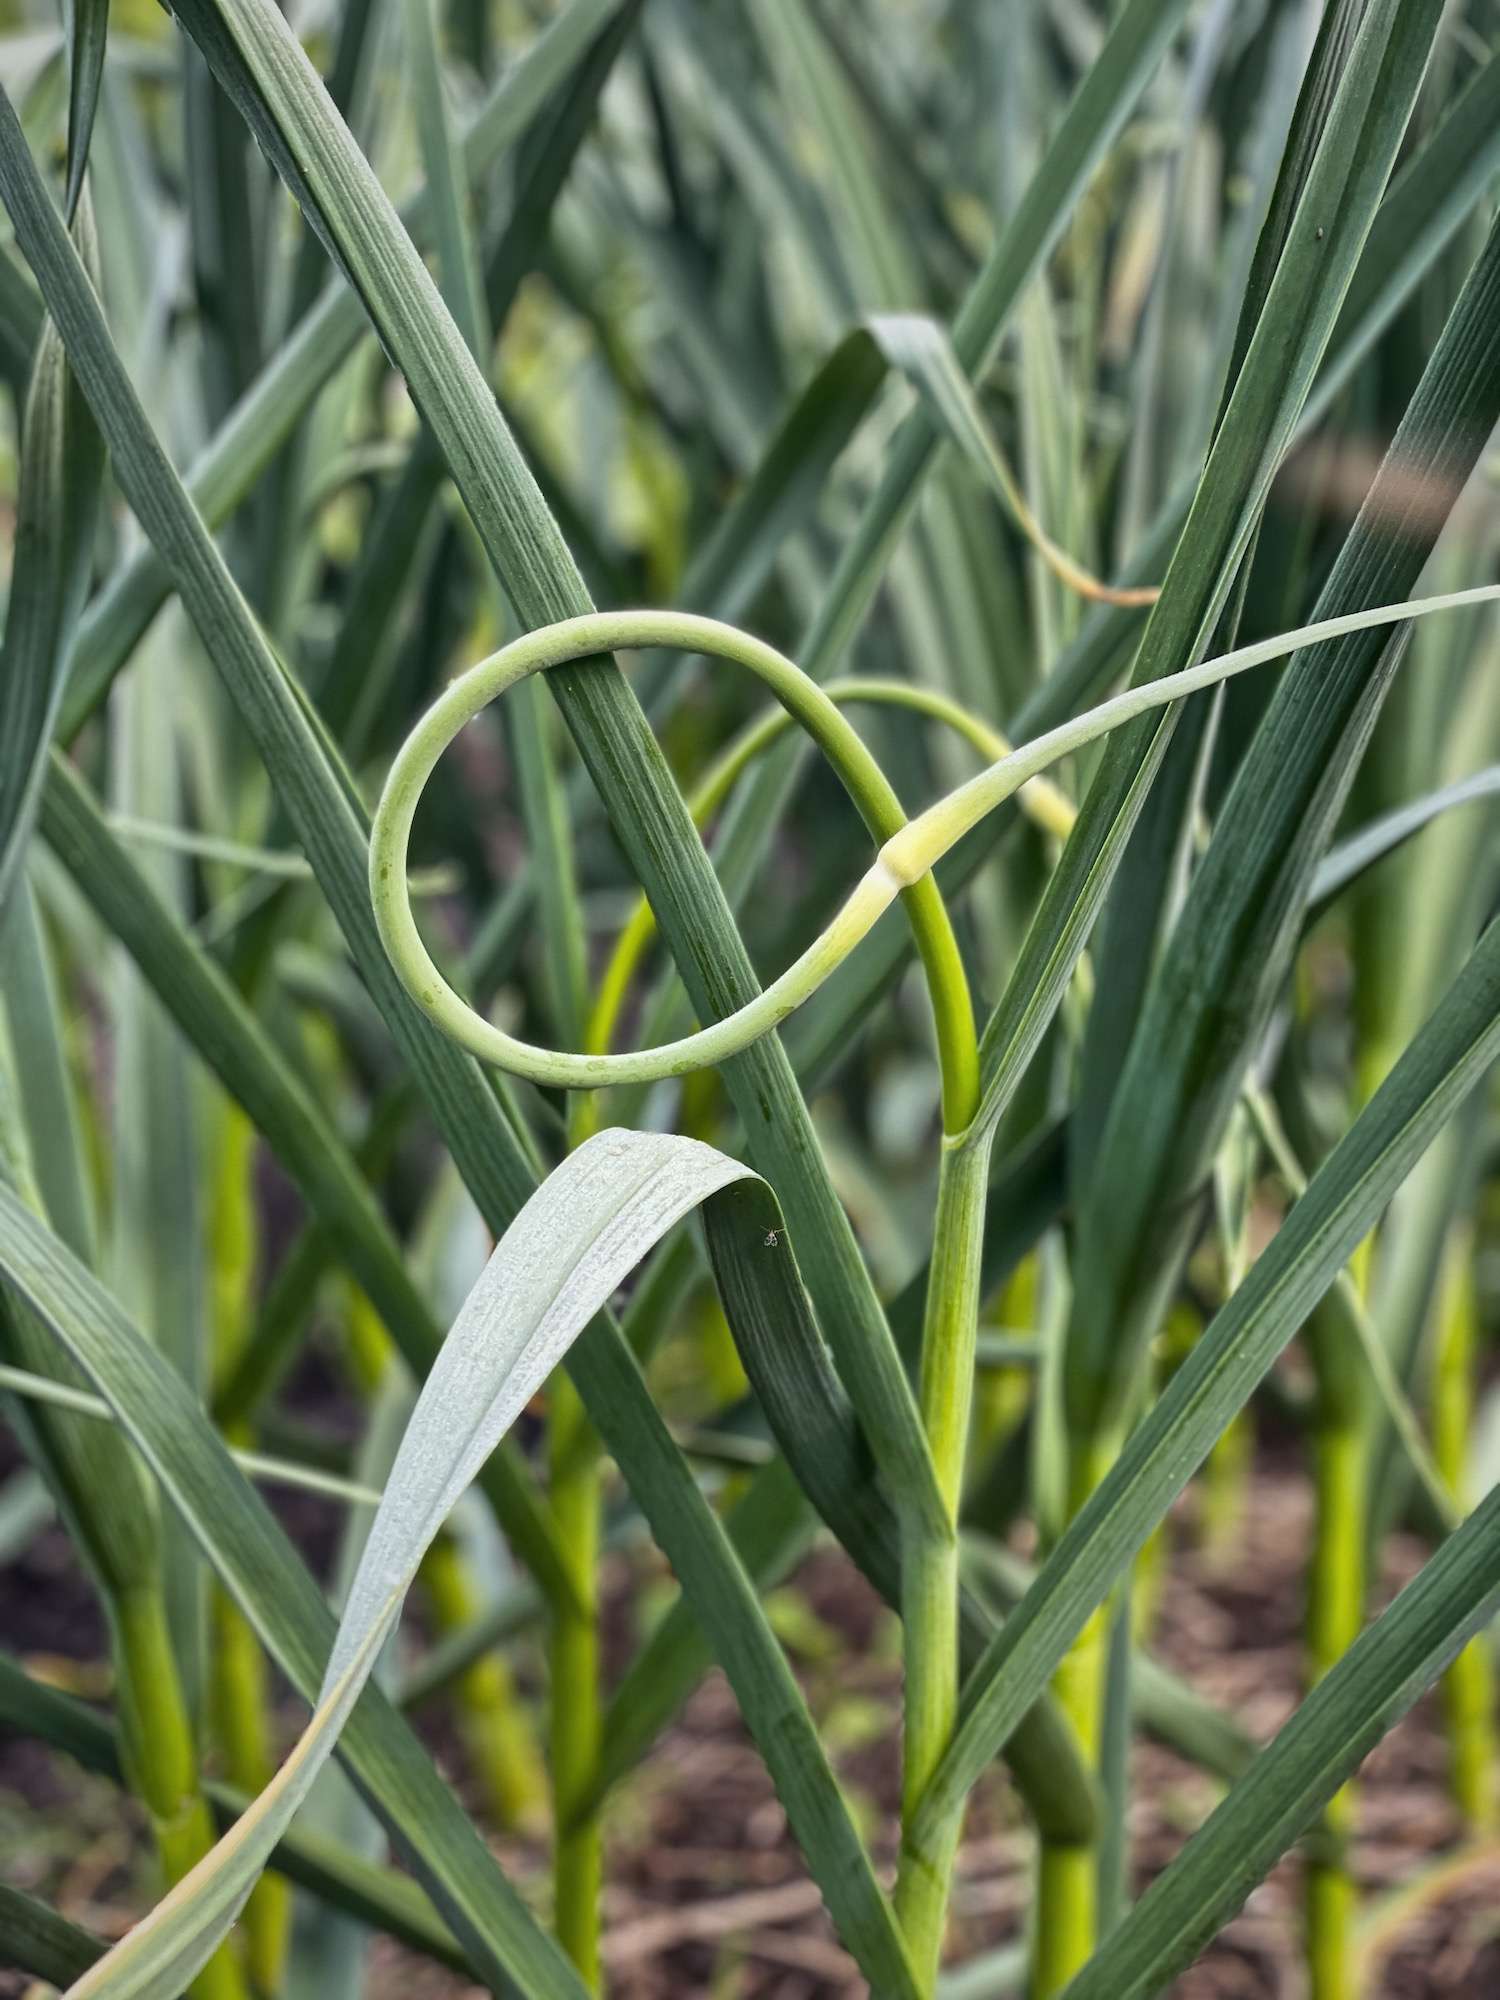 A close up photo of garlic scapes growing out of a garlic plant ready to be harvested.